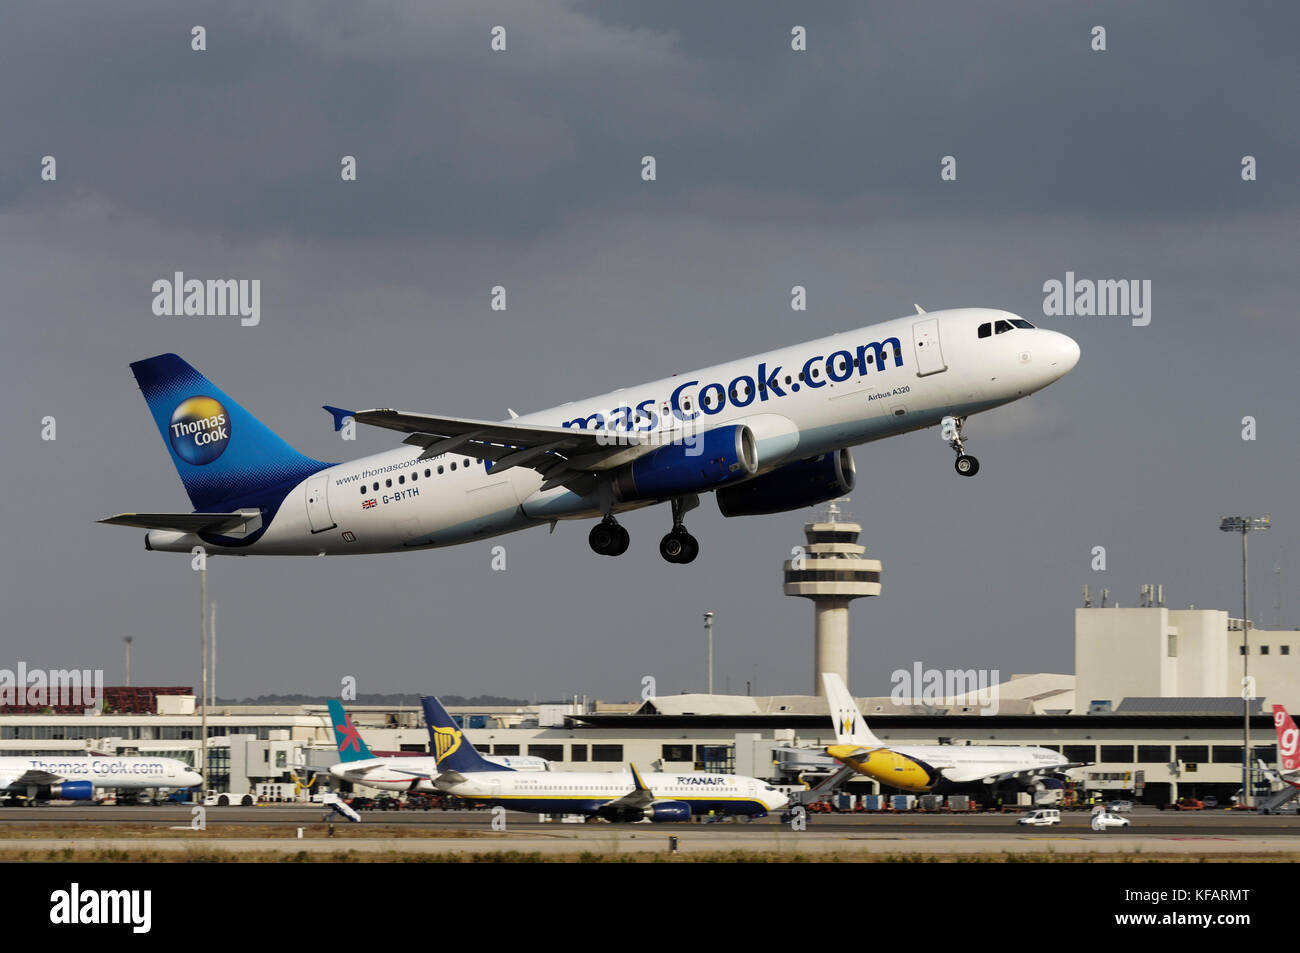 Thomas Cook Airlines Airbus A320-200 ThomasCook.com s'envolent avec Ryanair Boeing 737-800 le roulage, Monarch Airlines A300-600 et First Choice Airways Banque D'Images